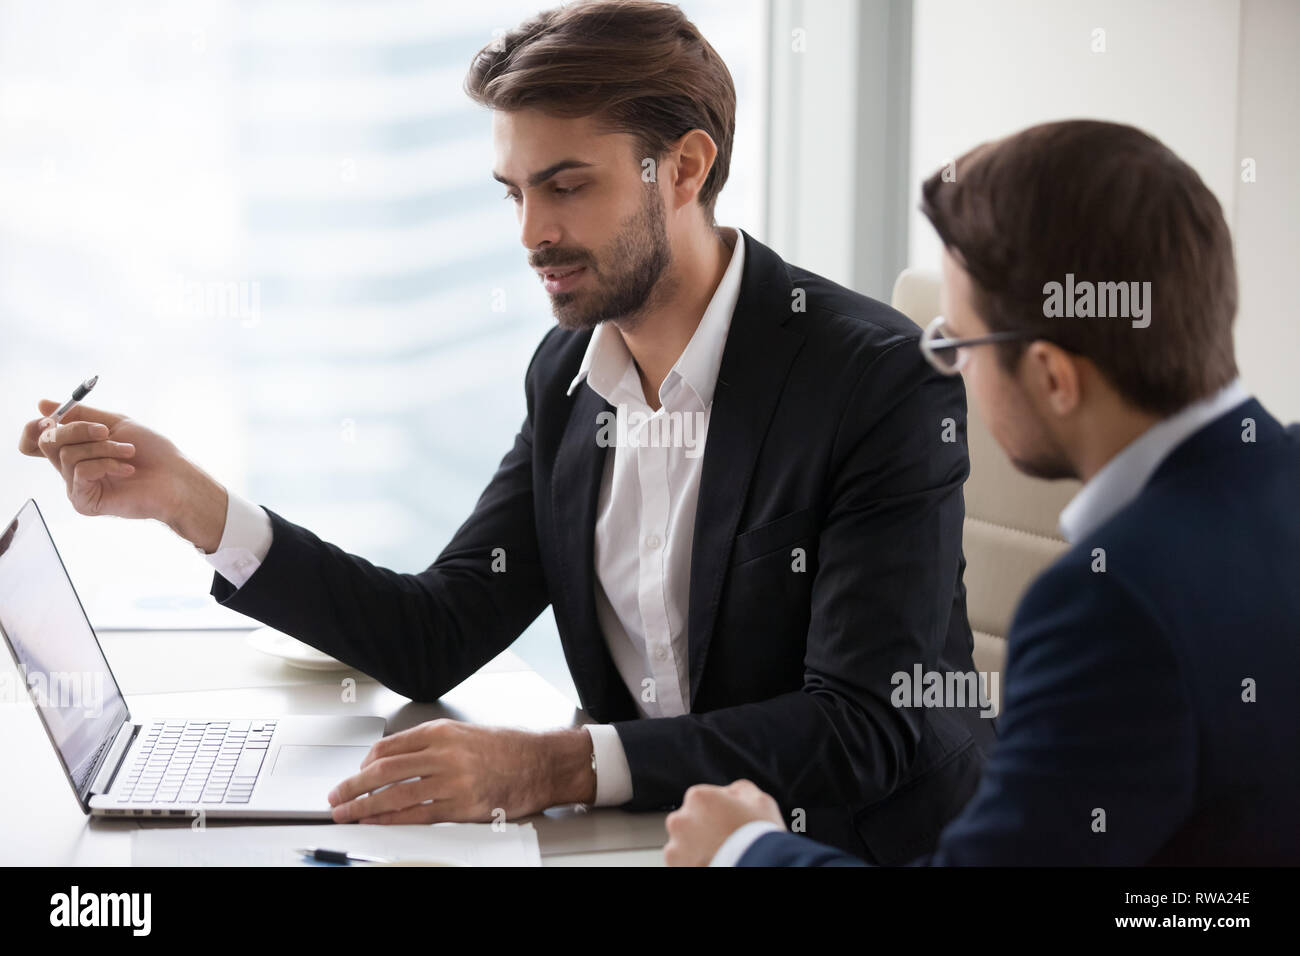 Serious businessman manager talking with client pointing at laptop Stock Photo